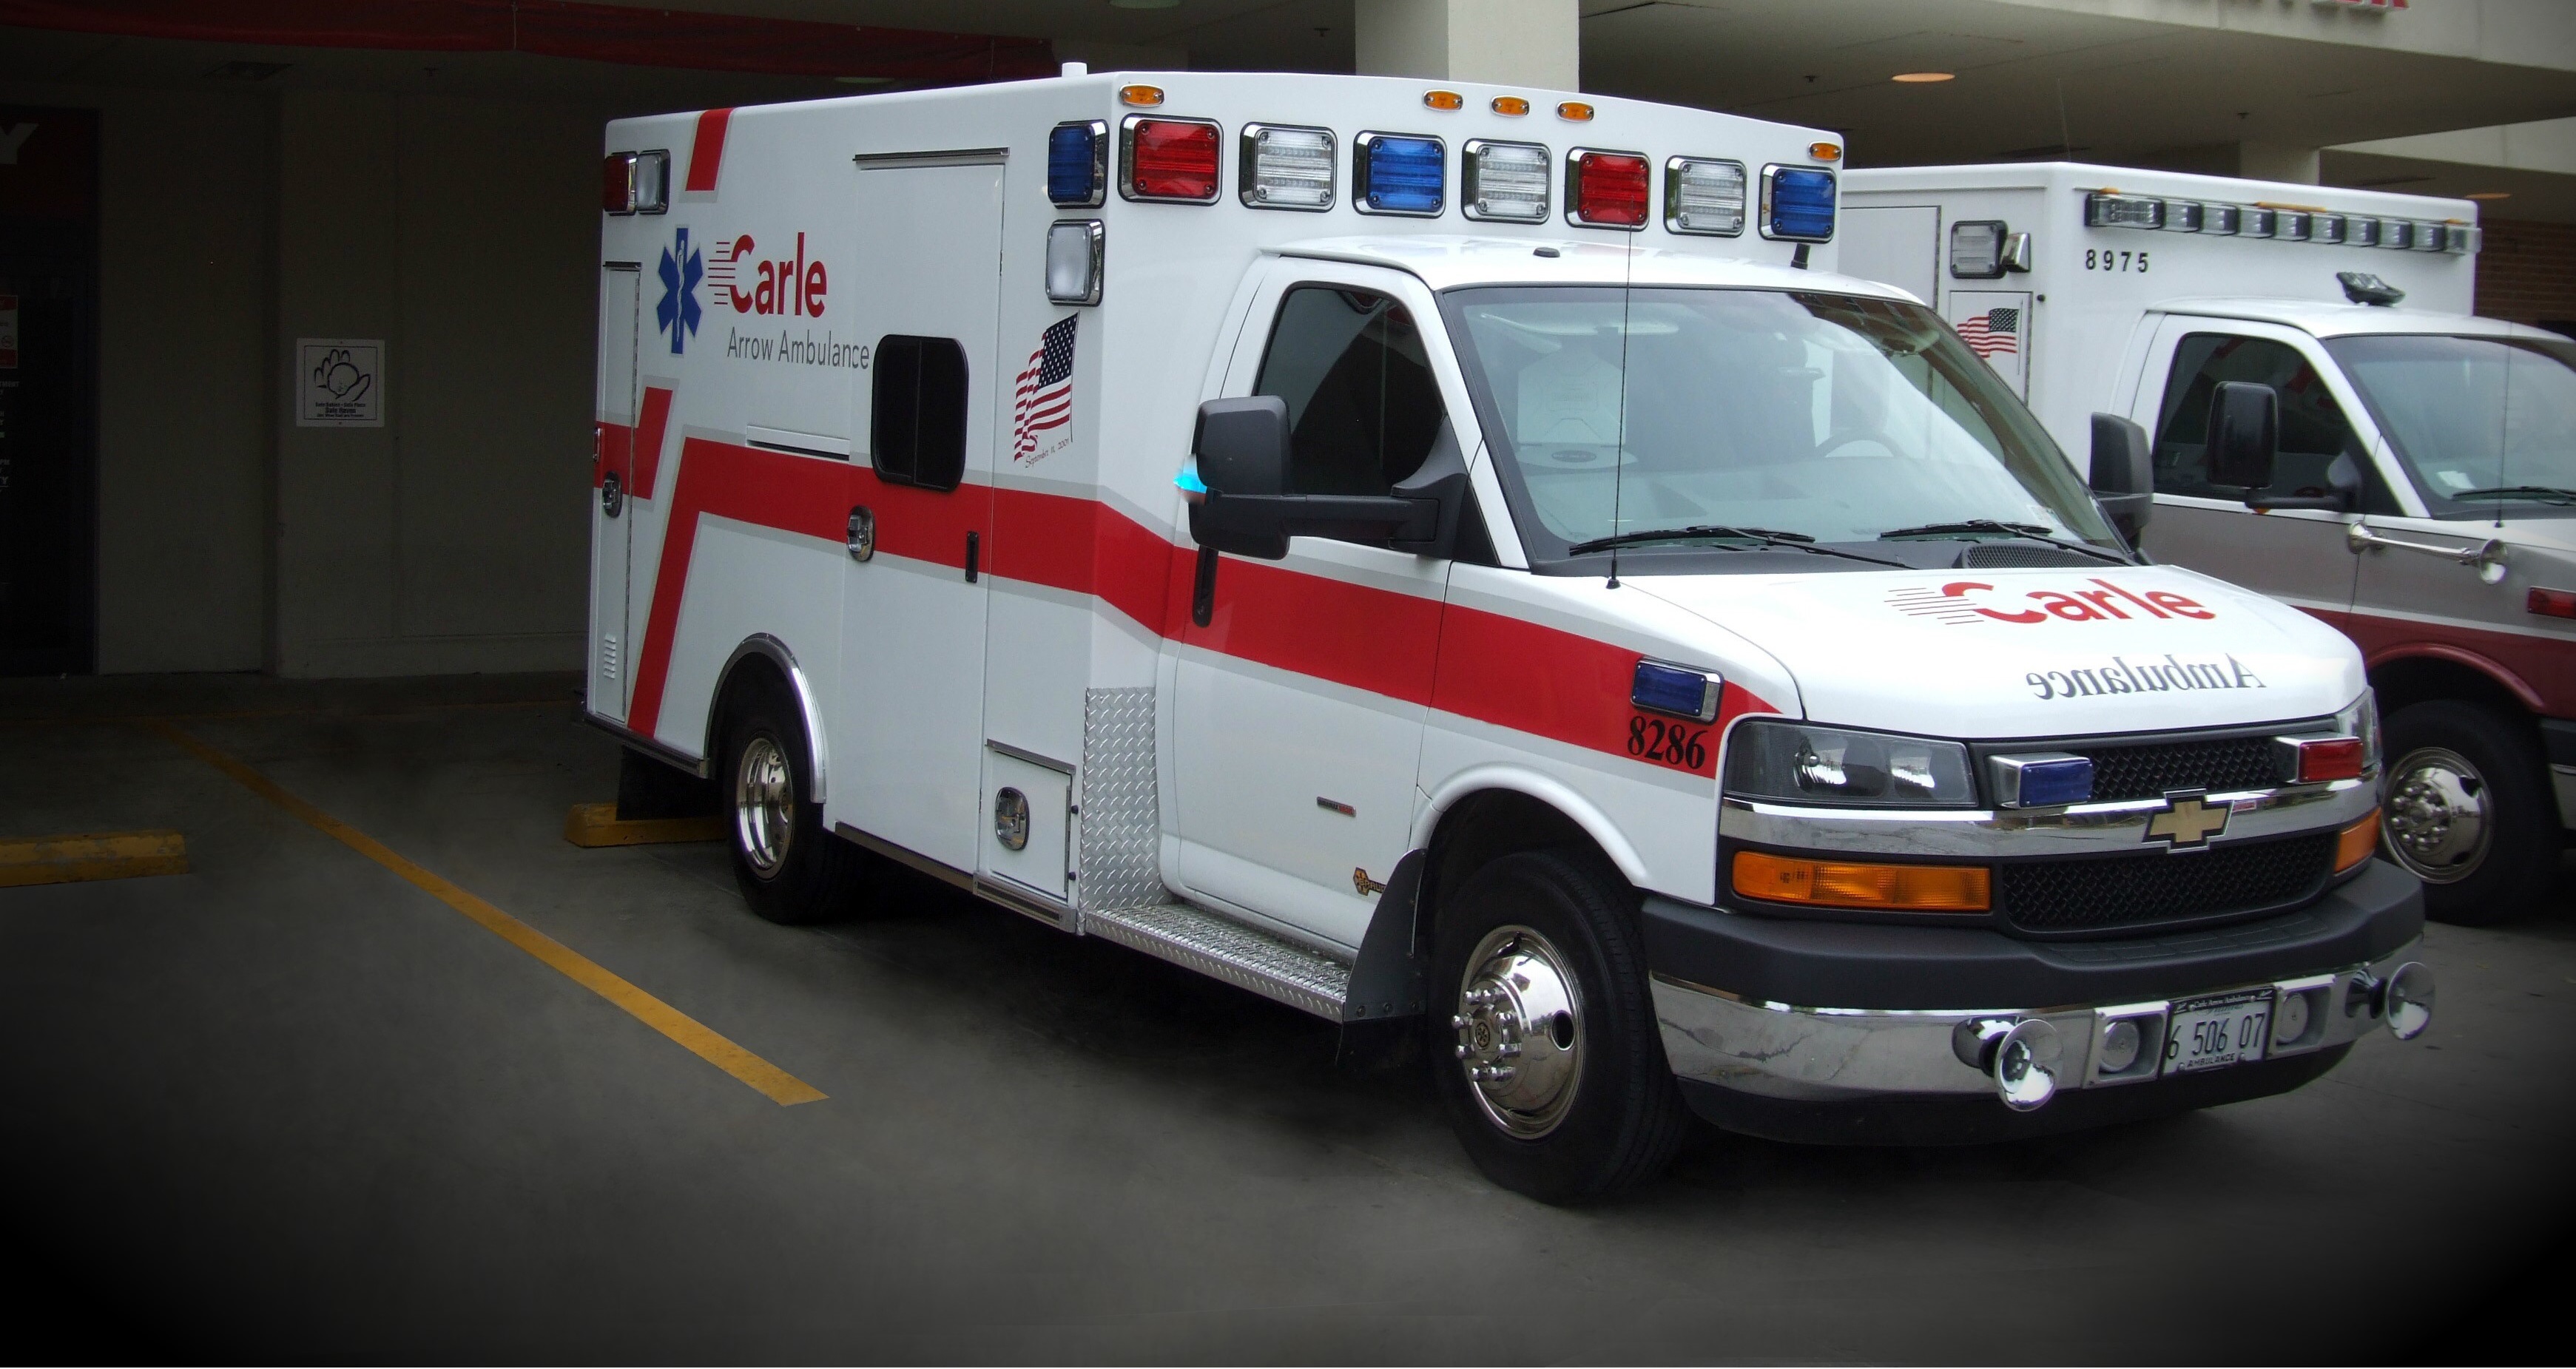 Six things you should do after calling an ambulance for someone